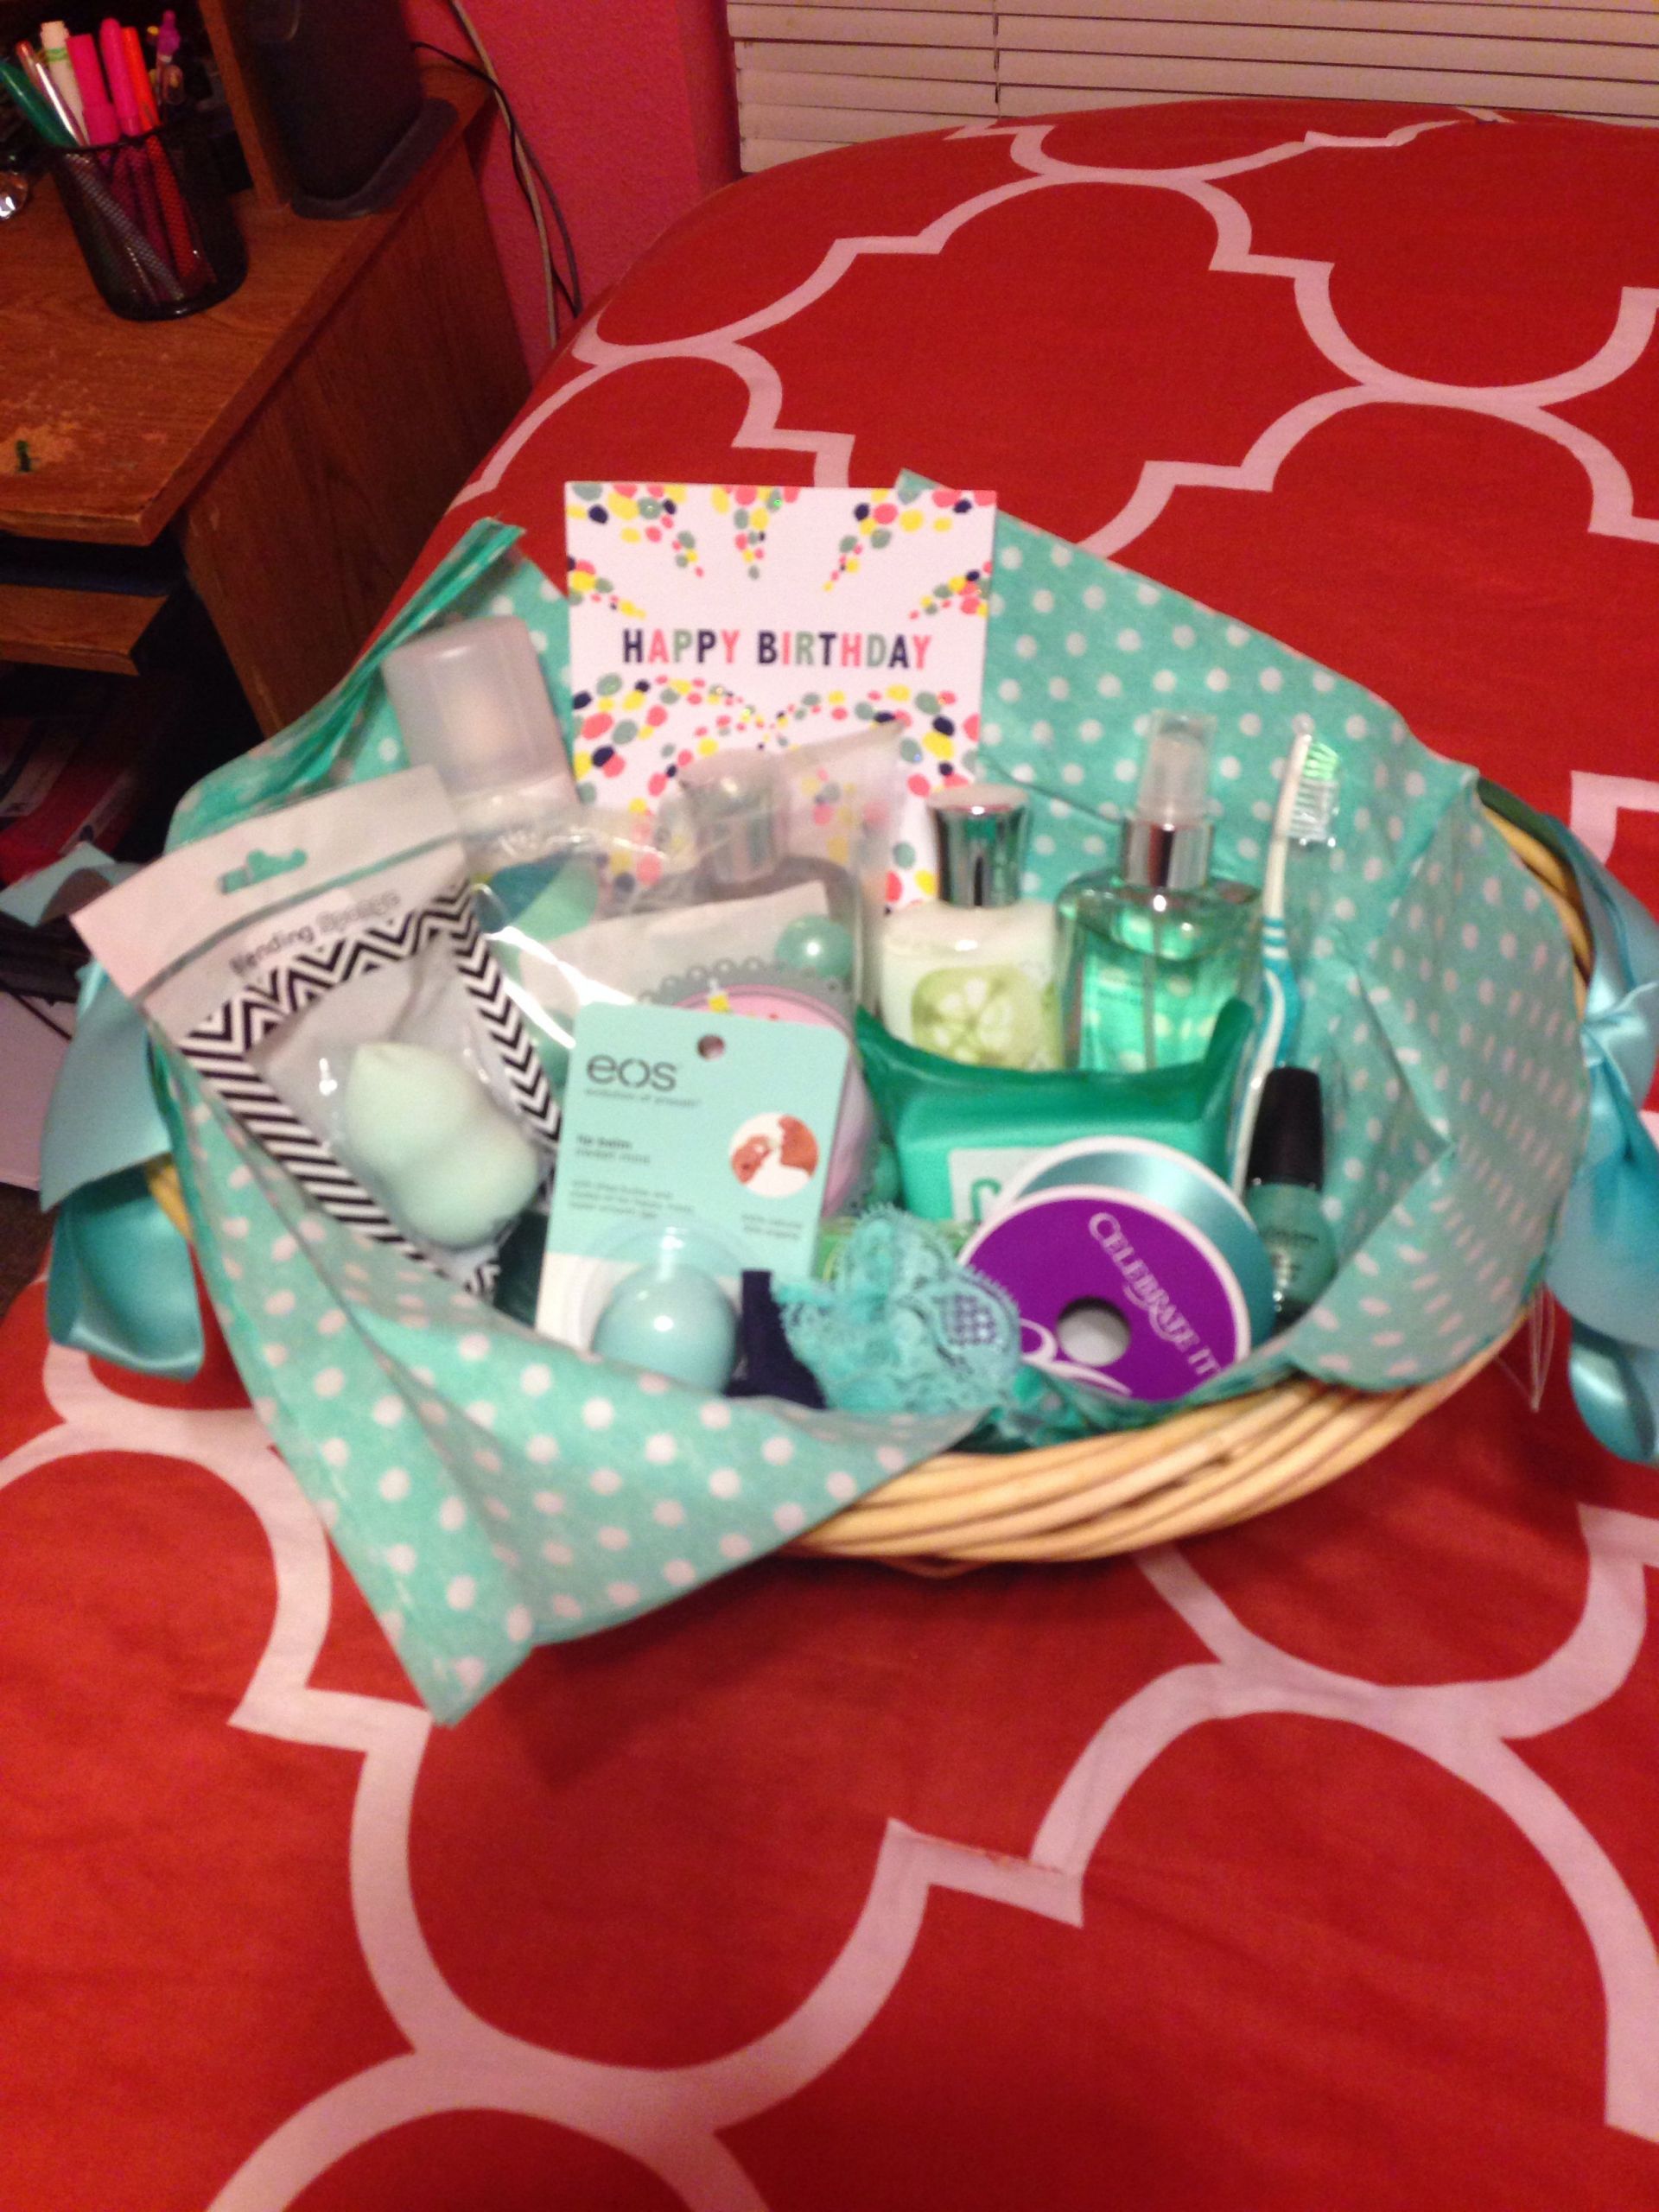 Best Friend Birthday Gift Basket Ideas
 Color themed t basket for a birthday